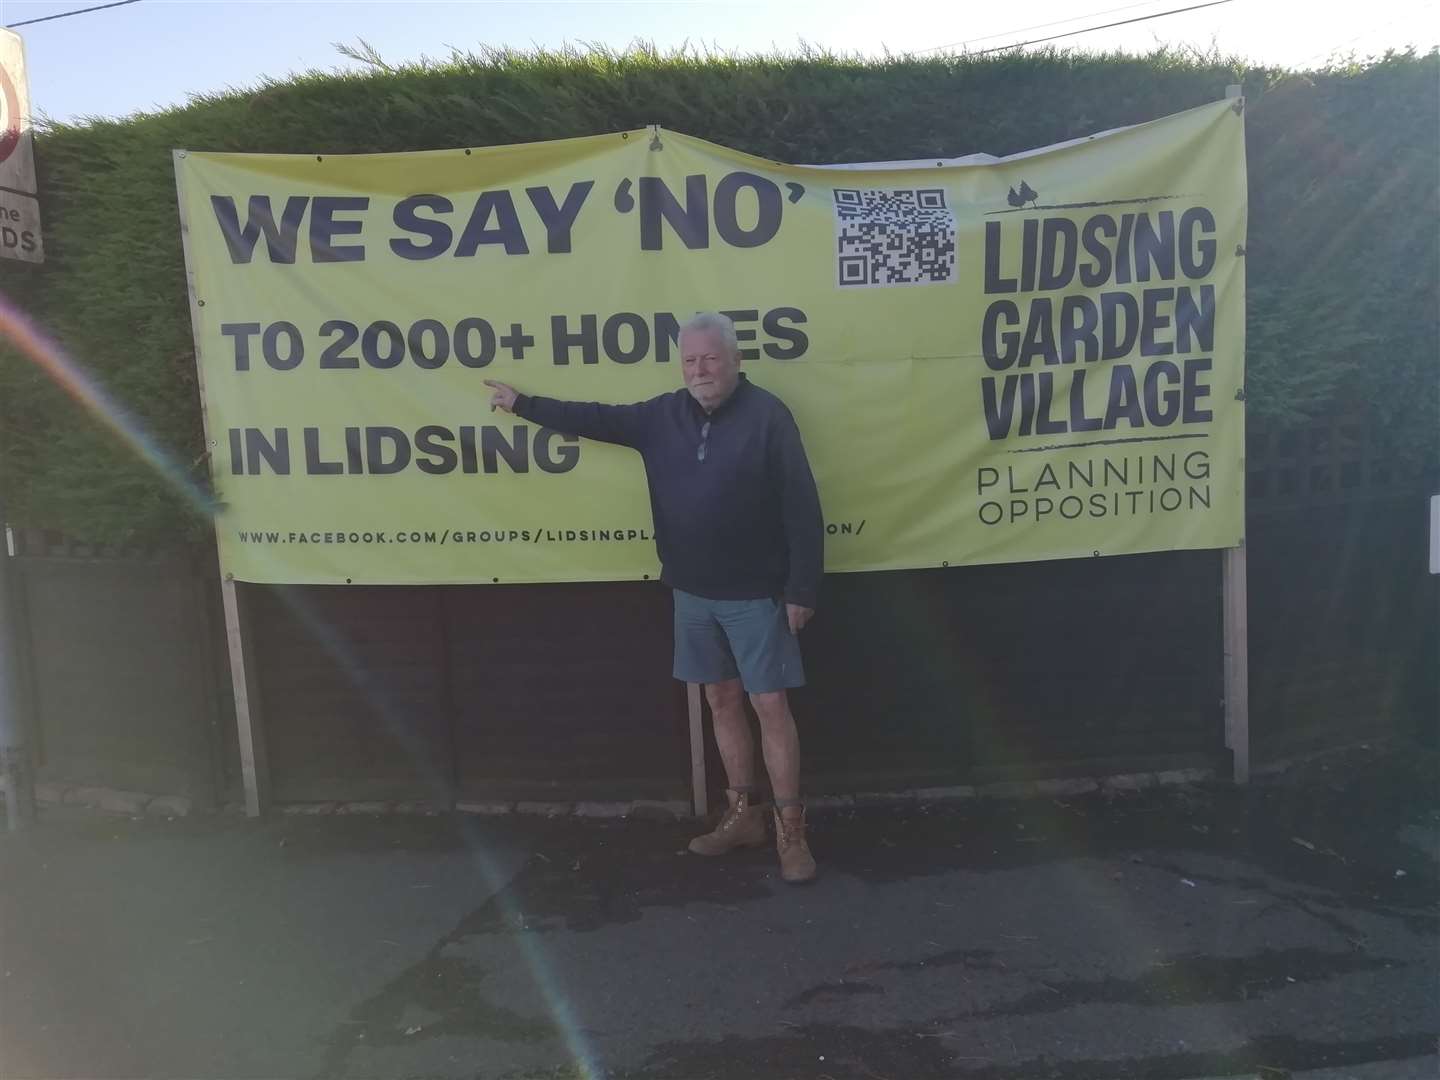 Peter Hannan is protesting against the plans